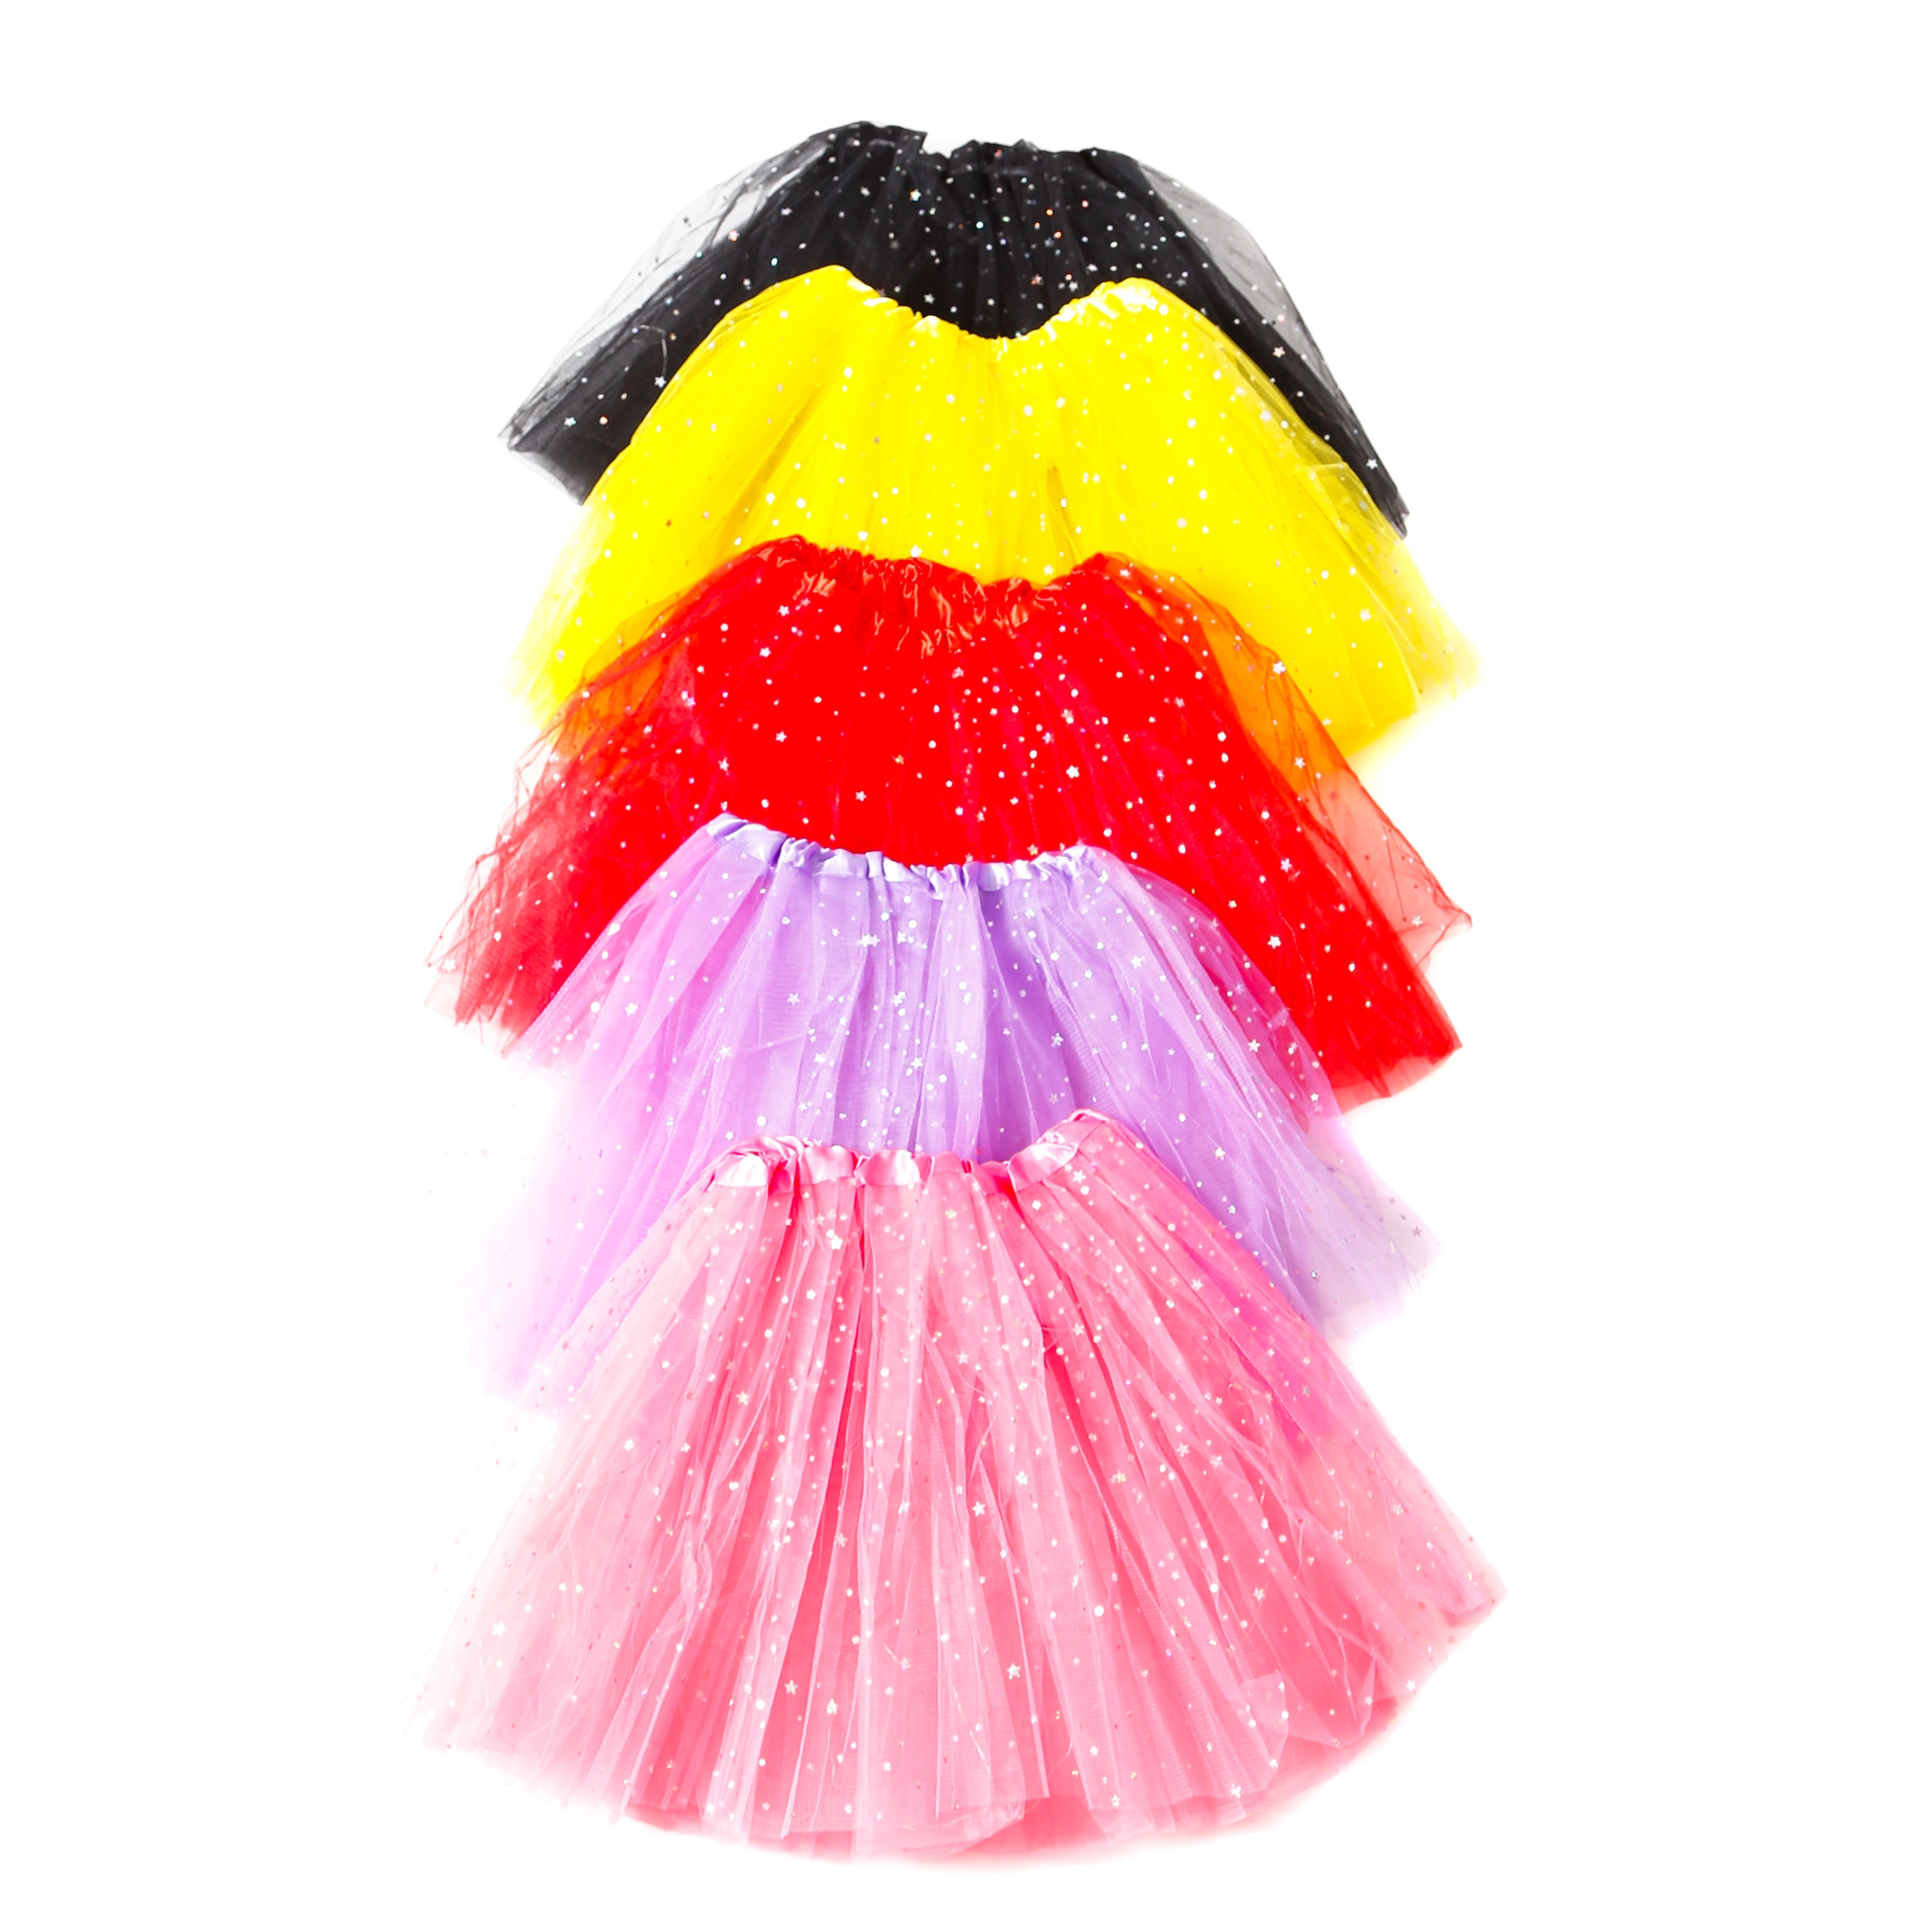 light up LED tutu skirt 2 Electro Glow | South Africa's Best LED Festival Gear & Rave Clothes - festivals outfits, clothes festival, festival clothing south africa, festival ideas outfits, festival outfits rave, festival wear, steam punk goggle, rave glasses, outfit for a rave, kaleidoscope glasses, diffraction glasses, clothes for a rave, rave sunglasses, spectral glasses, rave goggles, clothes for a rave, rave clothing south africa, festival wear south africa, accessories festival, rave sunglasses